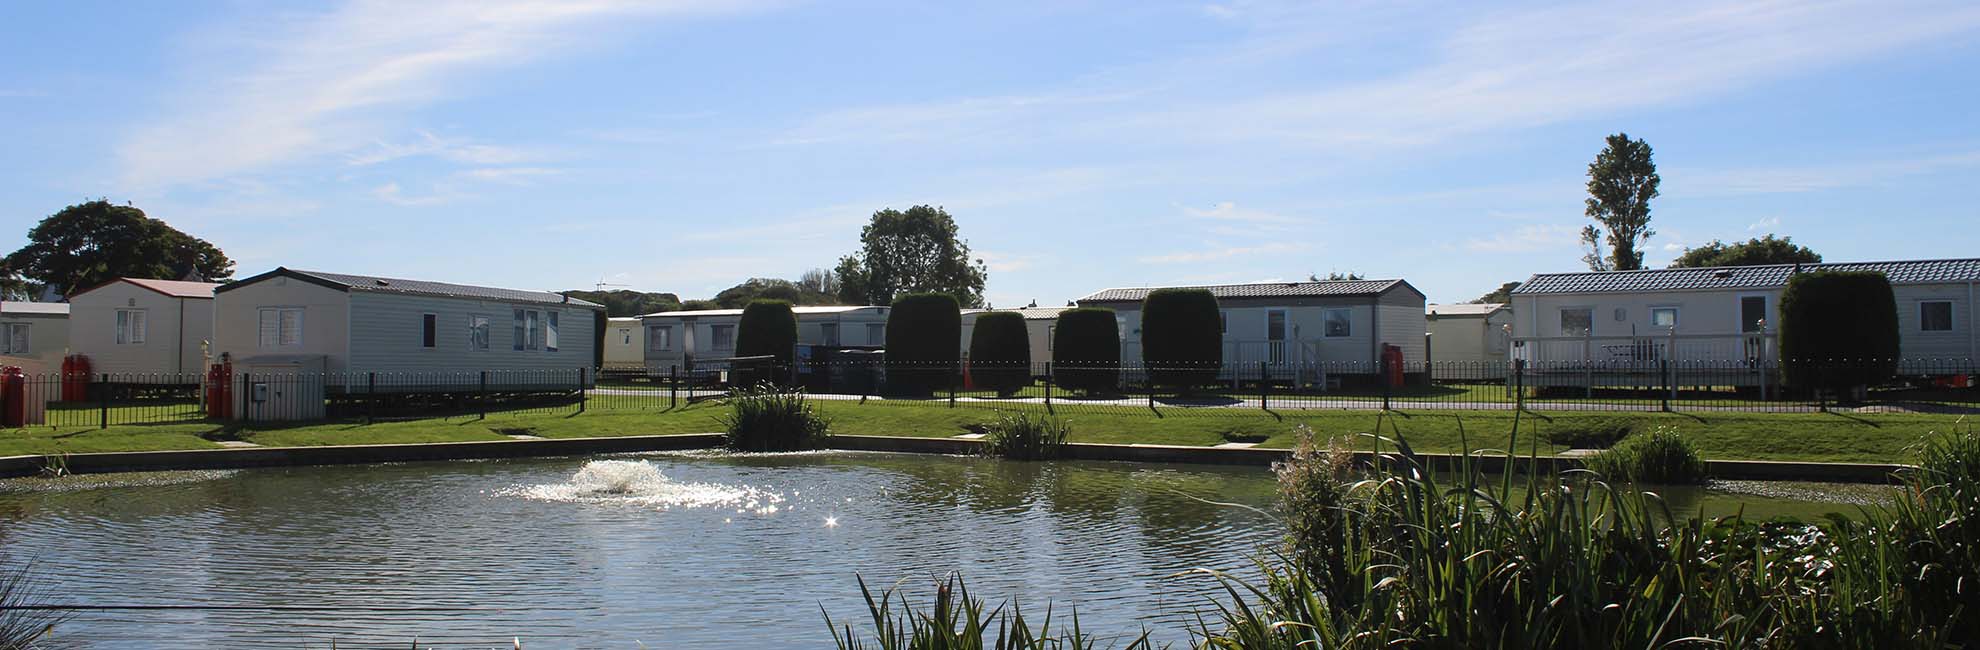 A view of the caravans overlooking the lake at Sunnydale Holiday Park